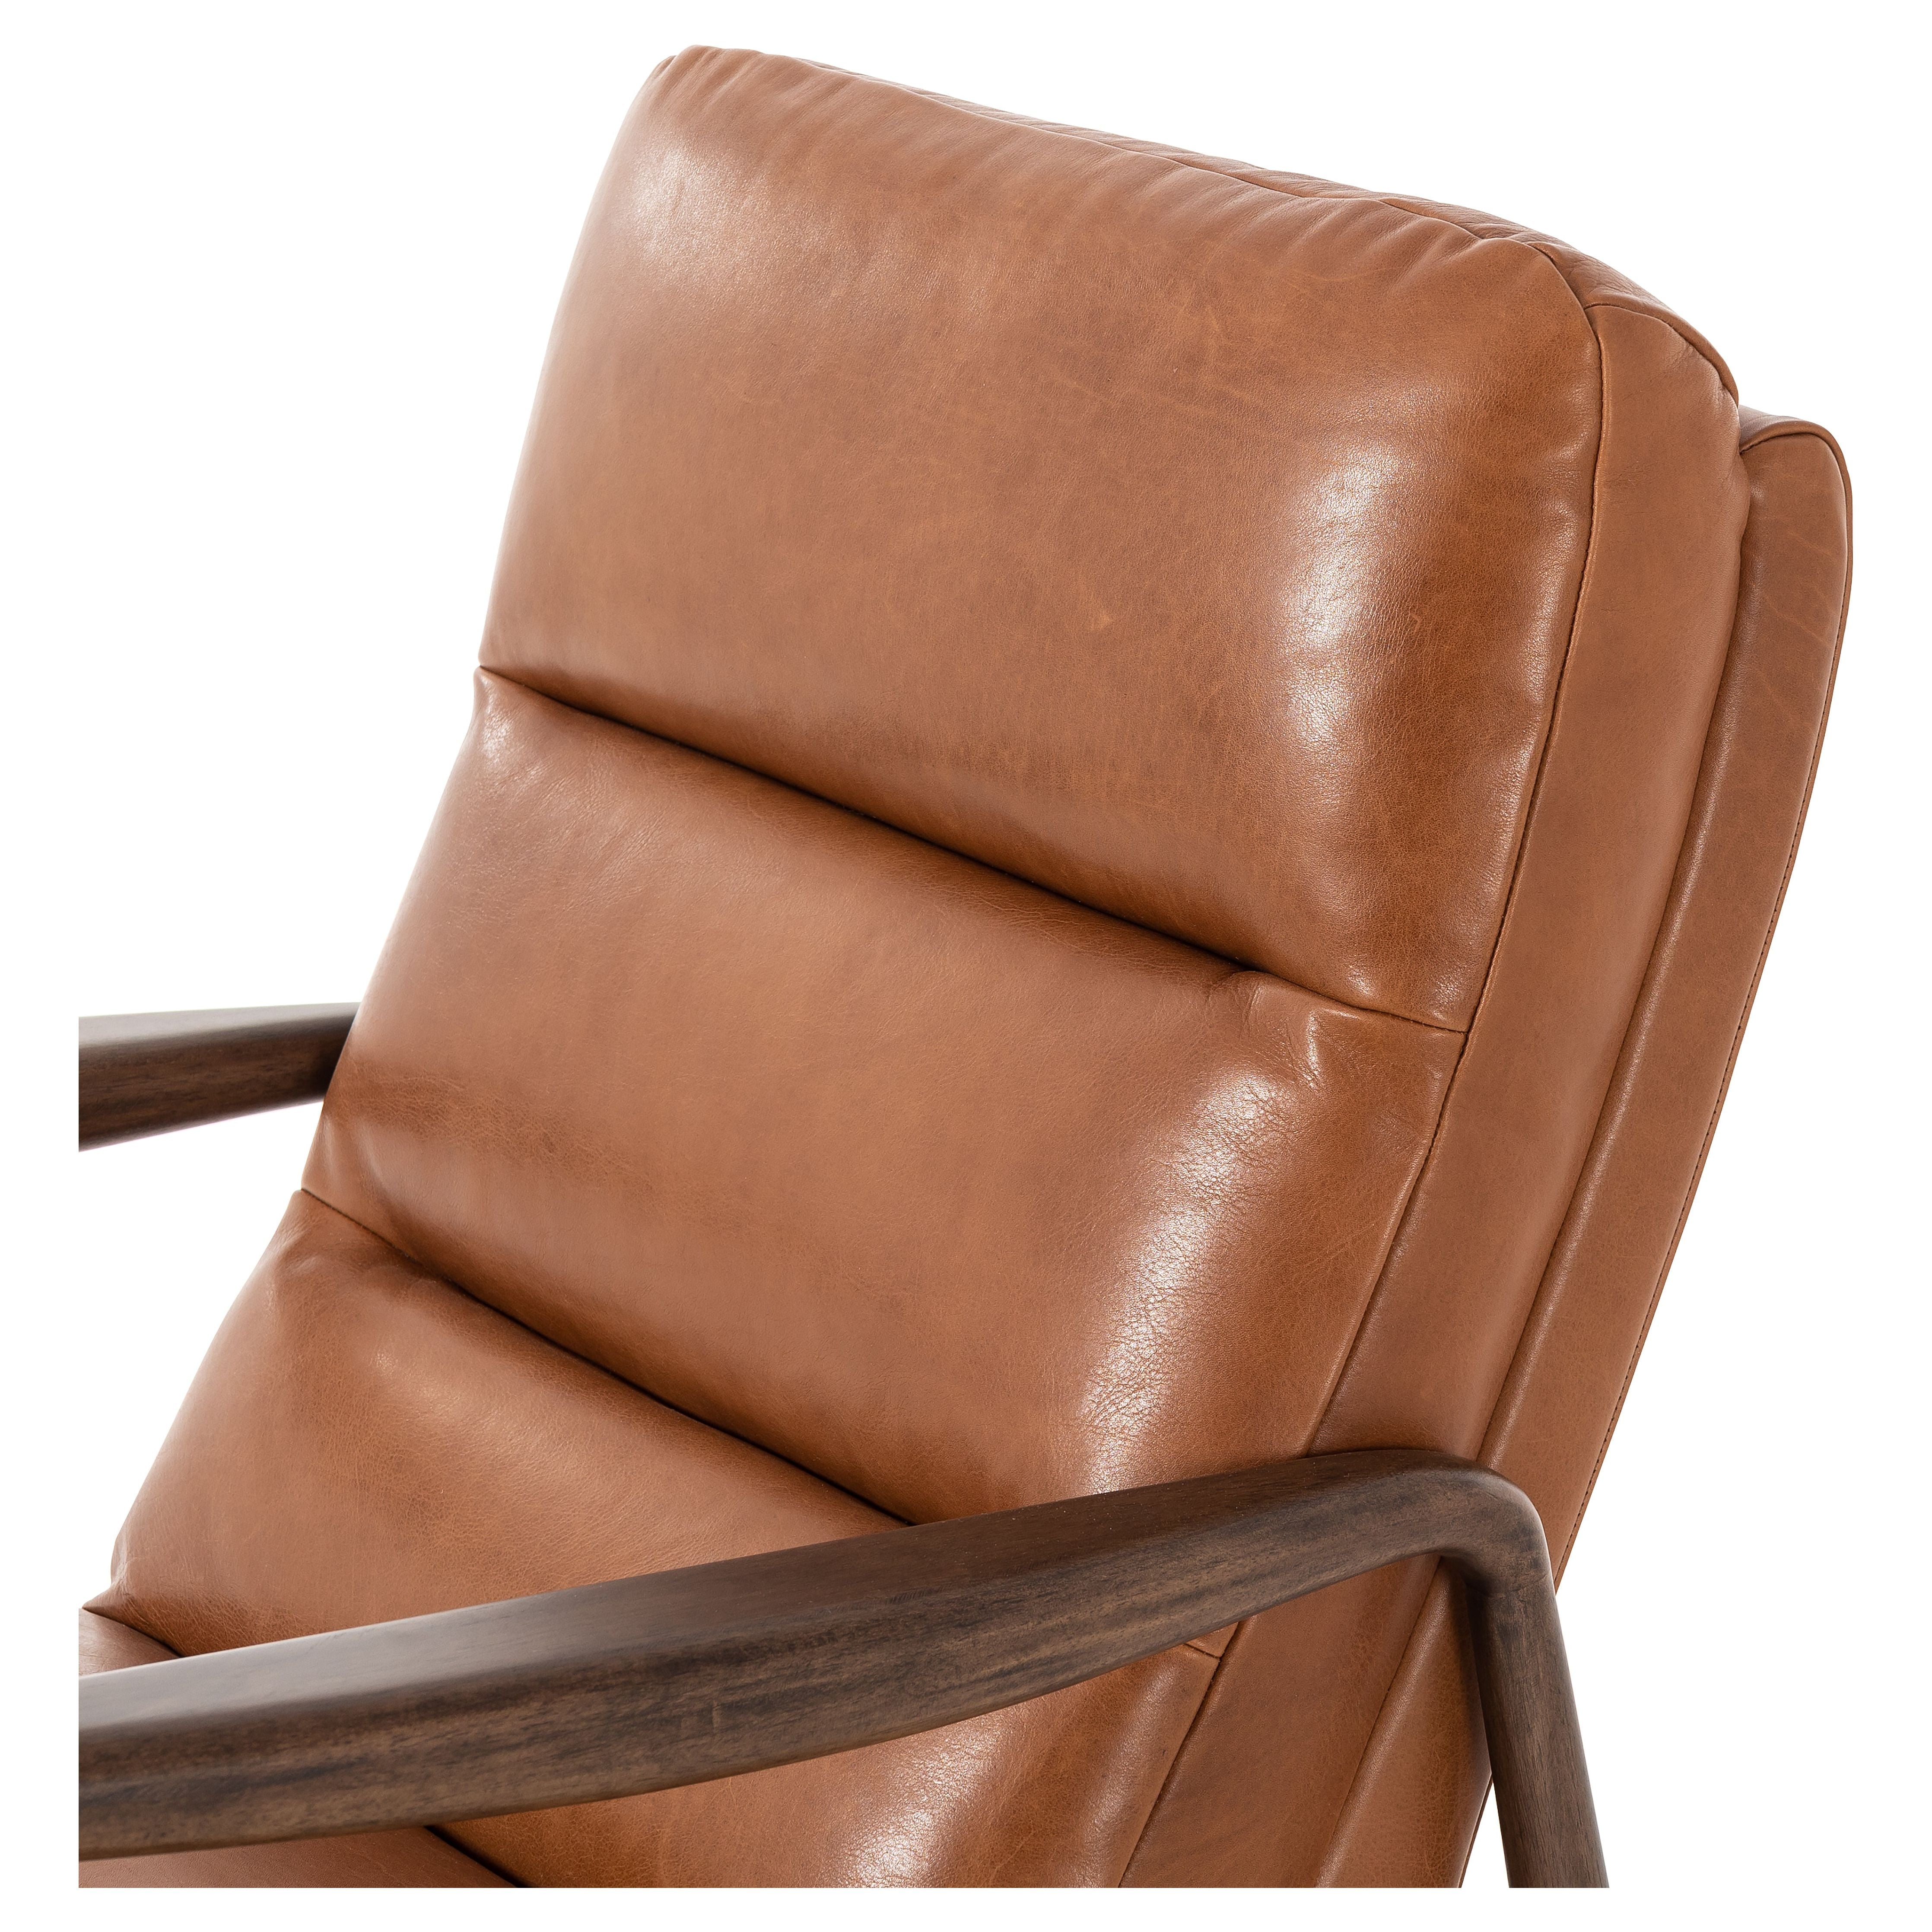 A sleek seat with hidden push-back reclining functionality. This midcentury-inspired recliner features wide chunky channeling paired with slim paddle arms and a tapered wood frame. Designed with a high seat and high back for extra comfy support. Upholstered in a timeless tobacco-hued leather made in a family-owned tannery in Thailand. Amethyst Home provides interior design, new construction, custom furniture, and area rugs in the Boston metro area.